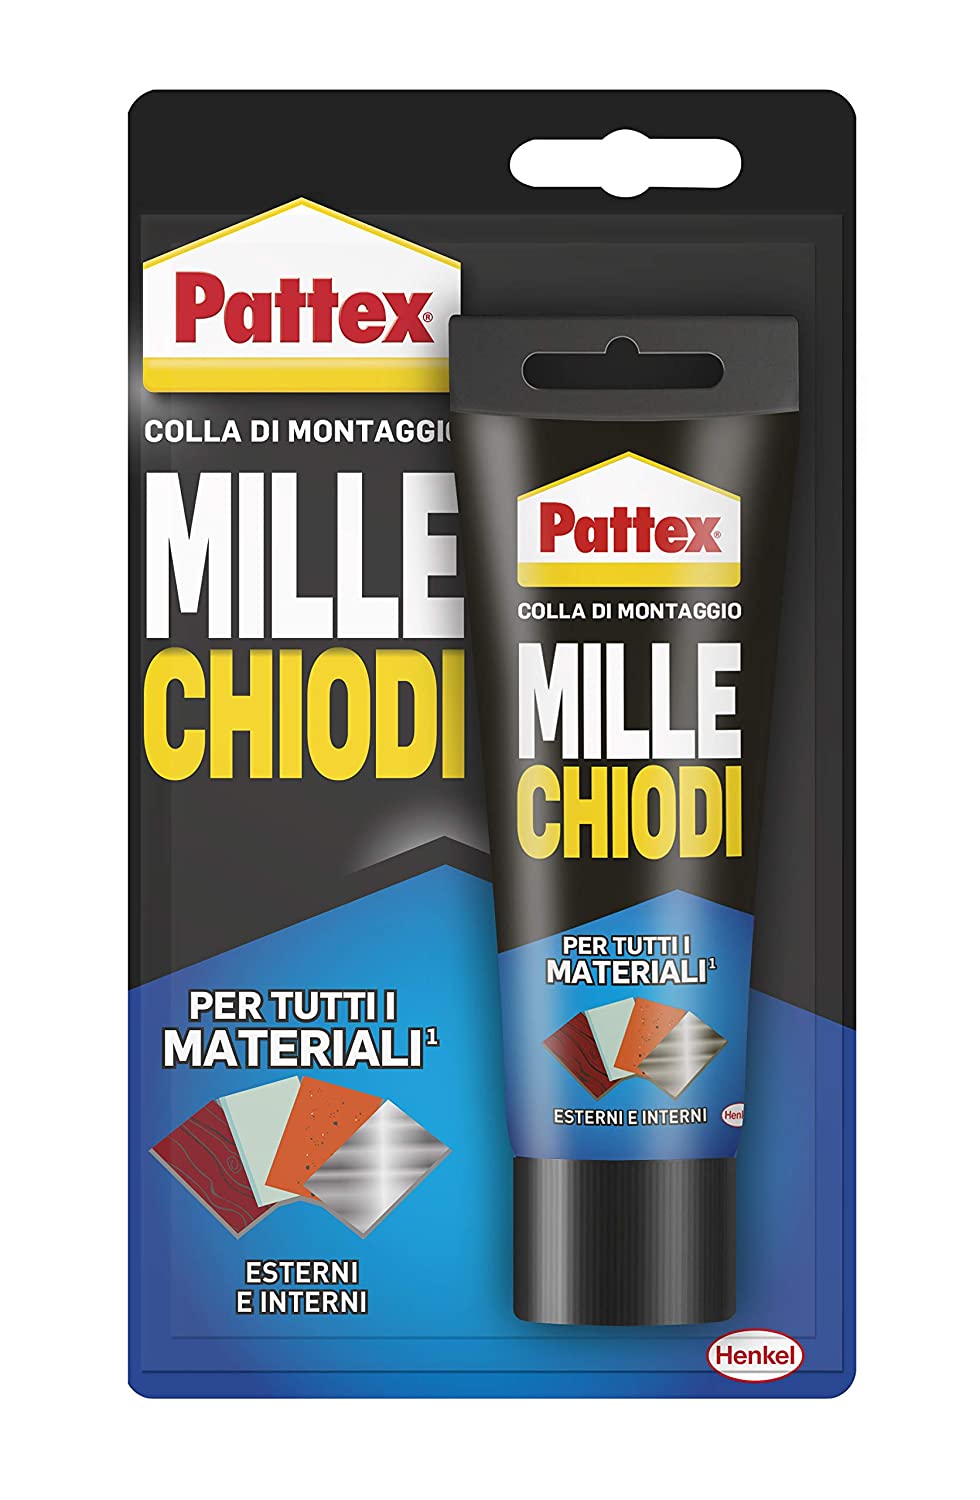 PATTEX Millechiodi for all internal and external materials